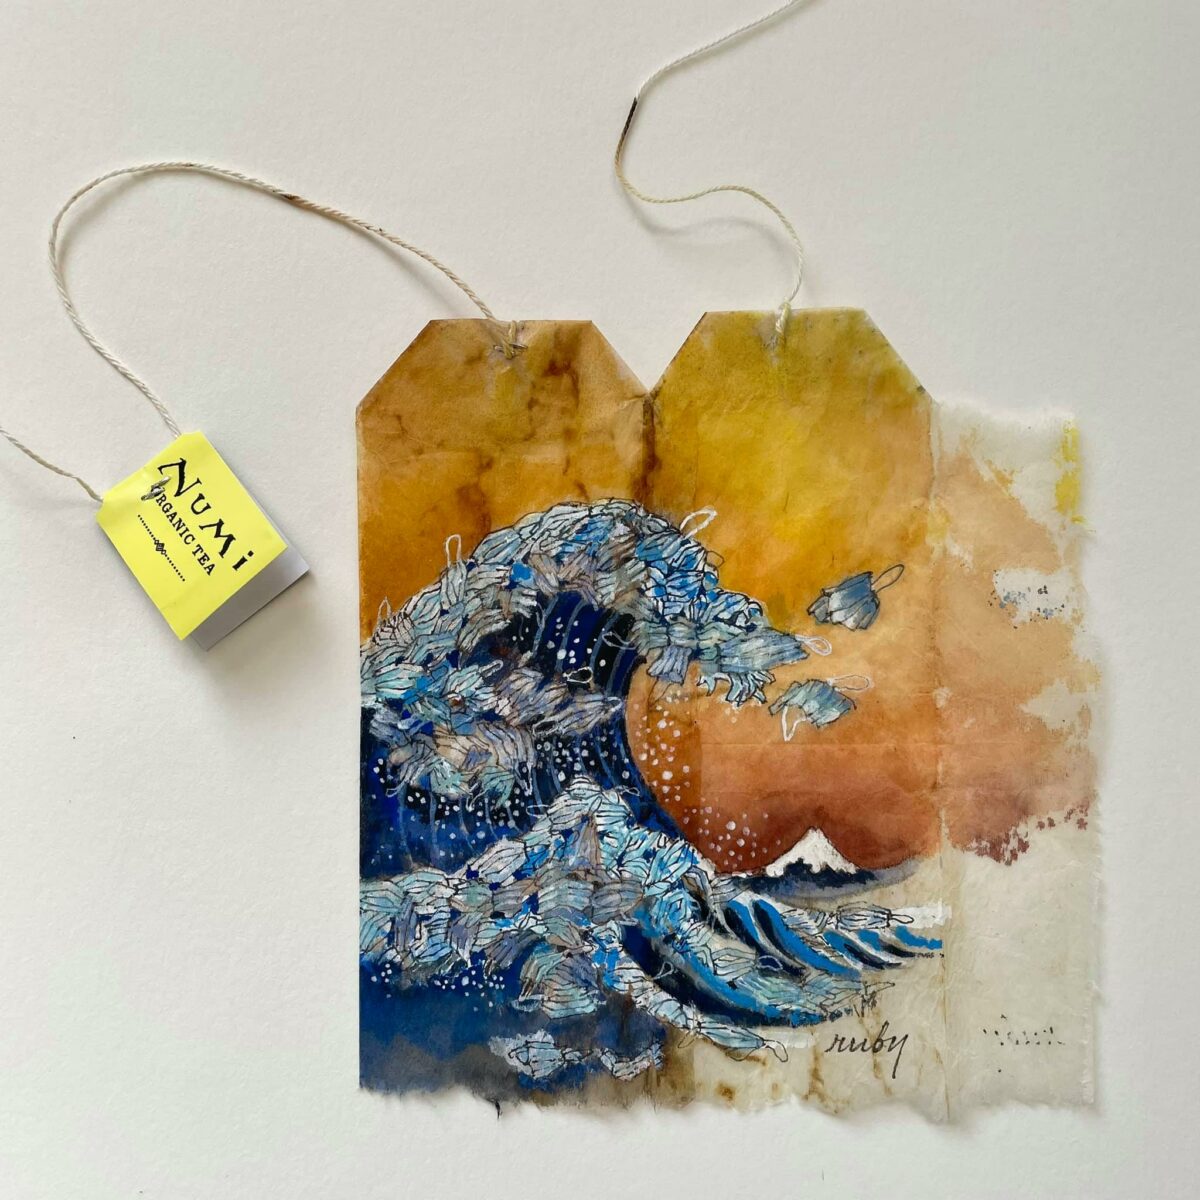 Gorgeous Miniature Watercolors Painted On Used Teabags By Ruby Silvious 3